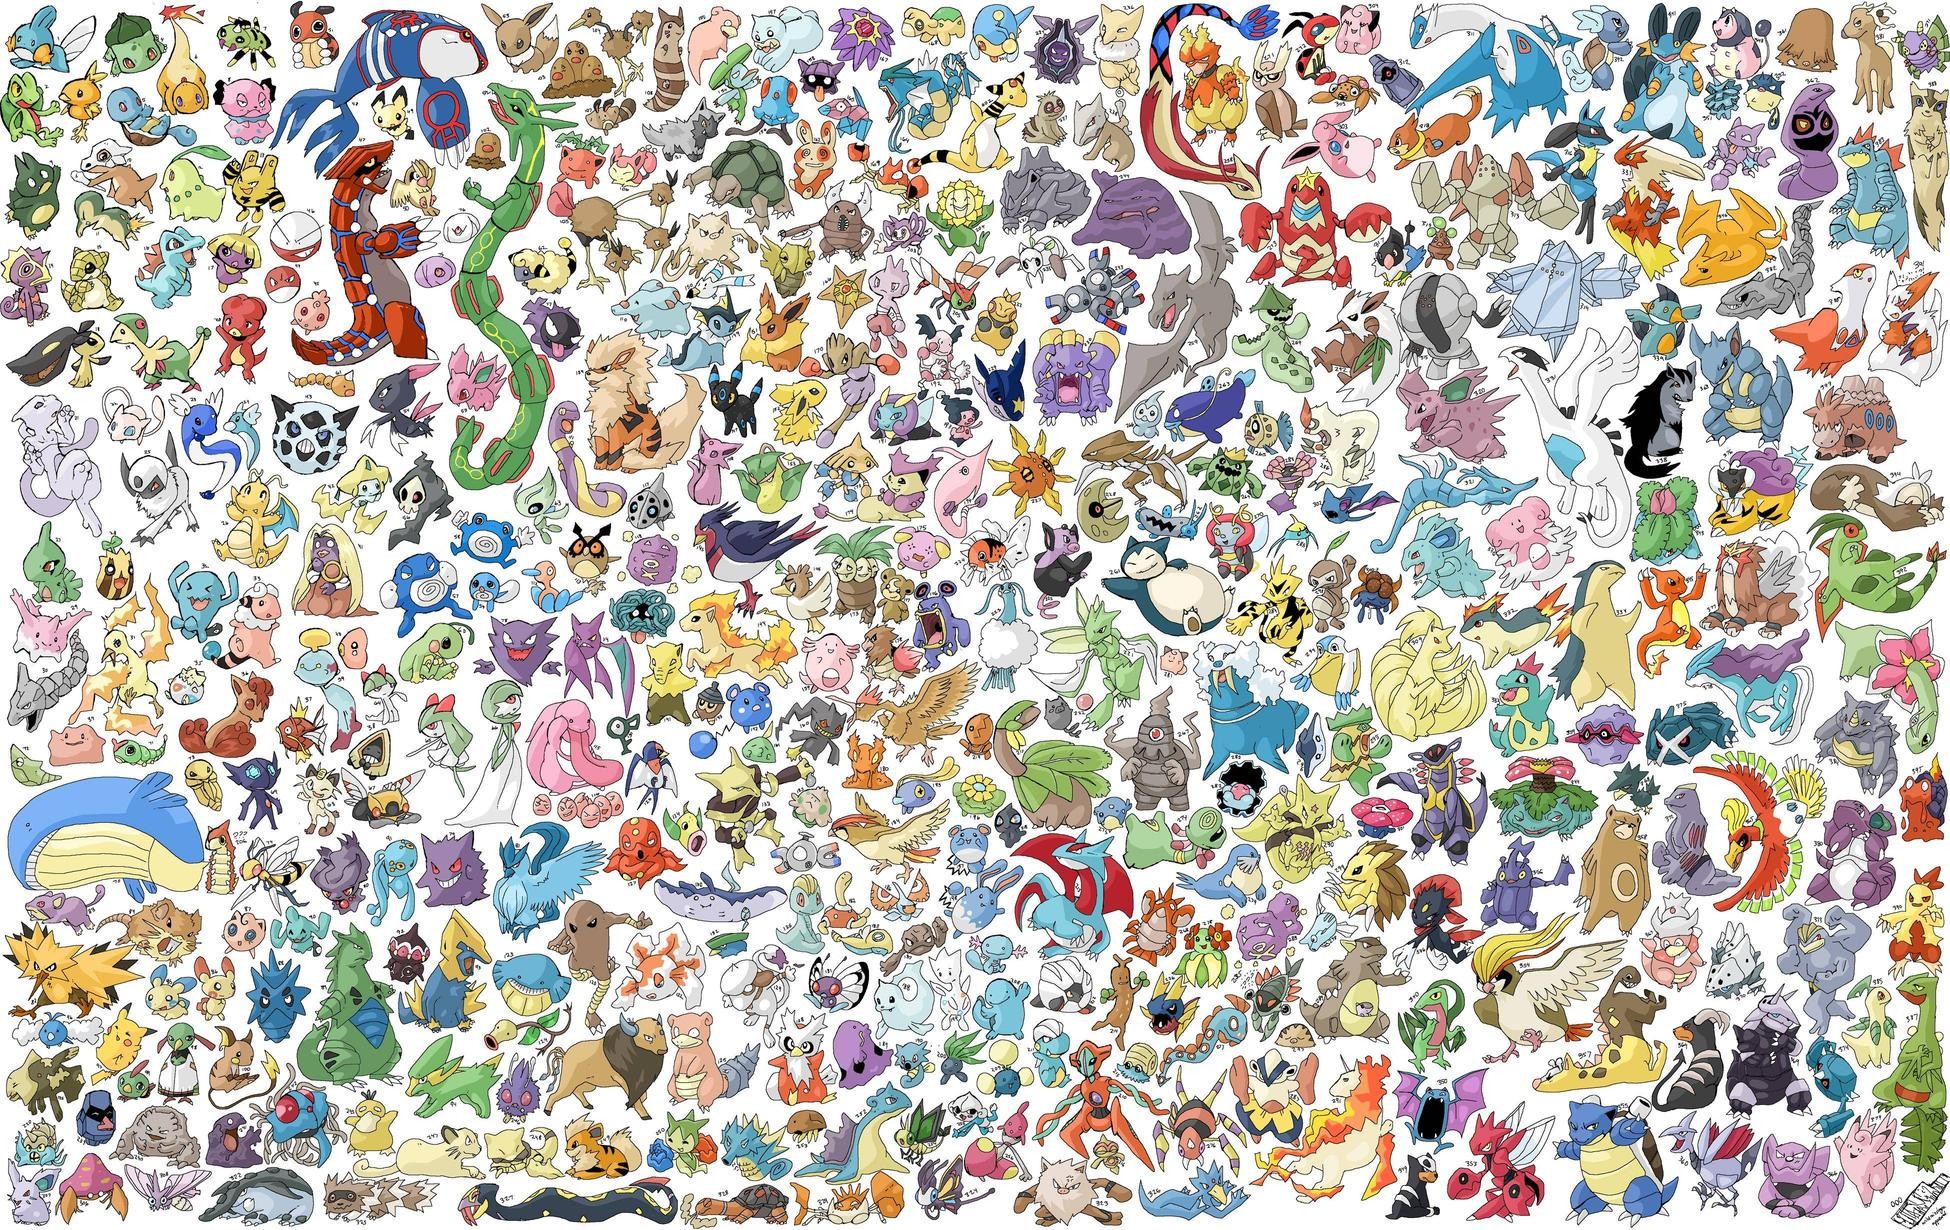 Pokemon Backgrounds Free EPS, PSD, JPEG Format Download 19201080 Pokemon Backgrounds Pictures